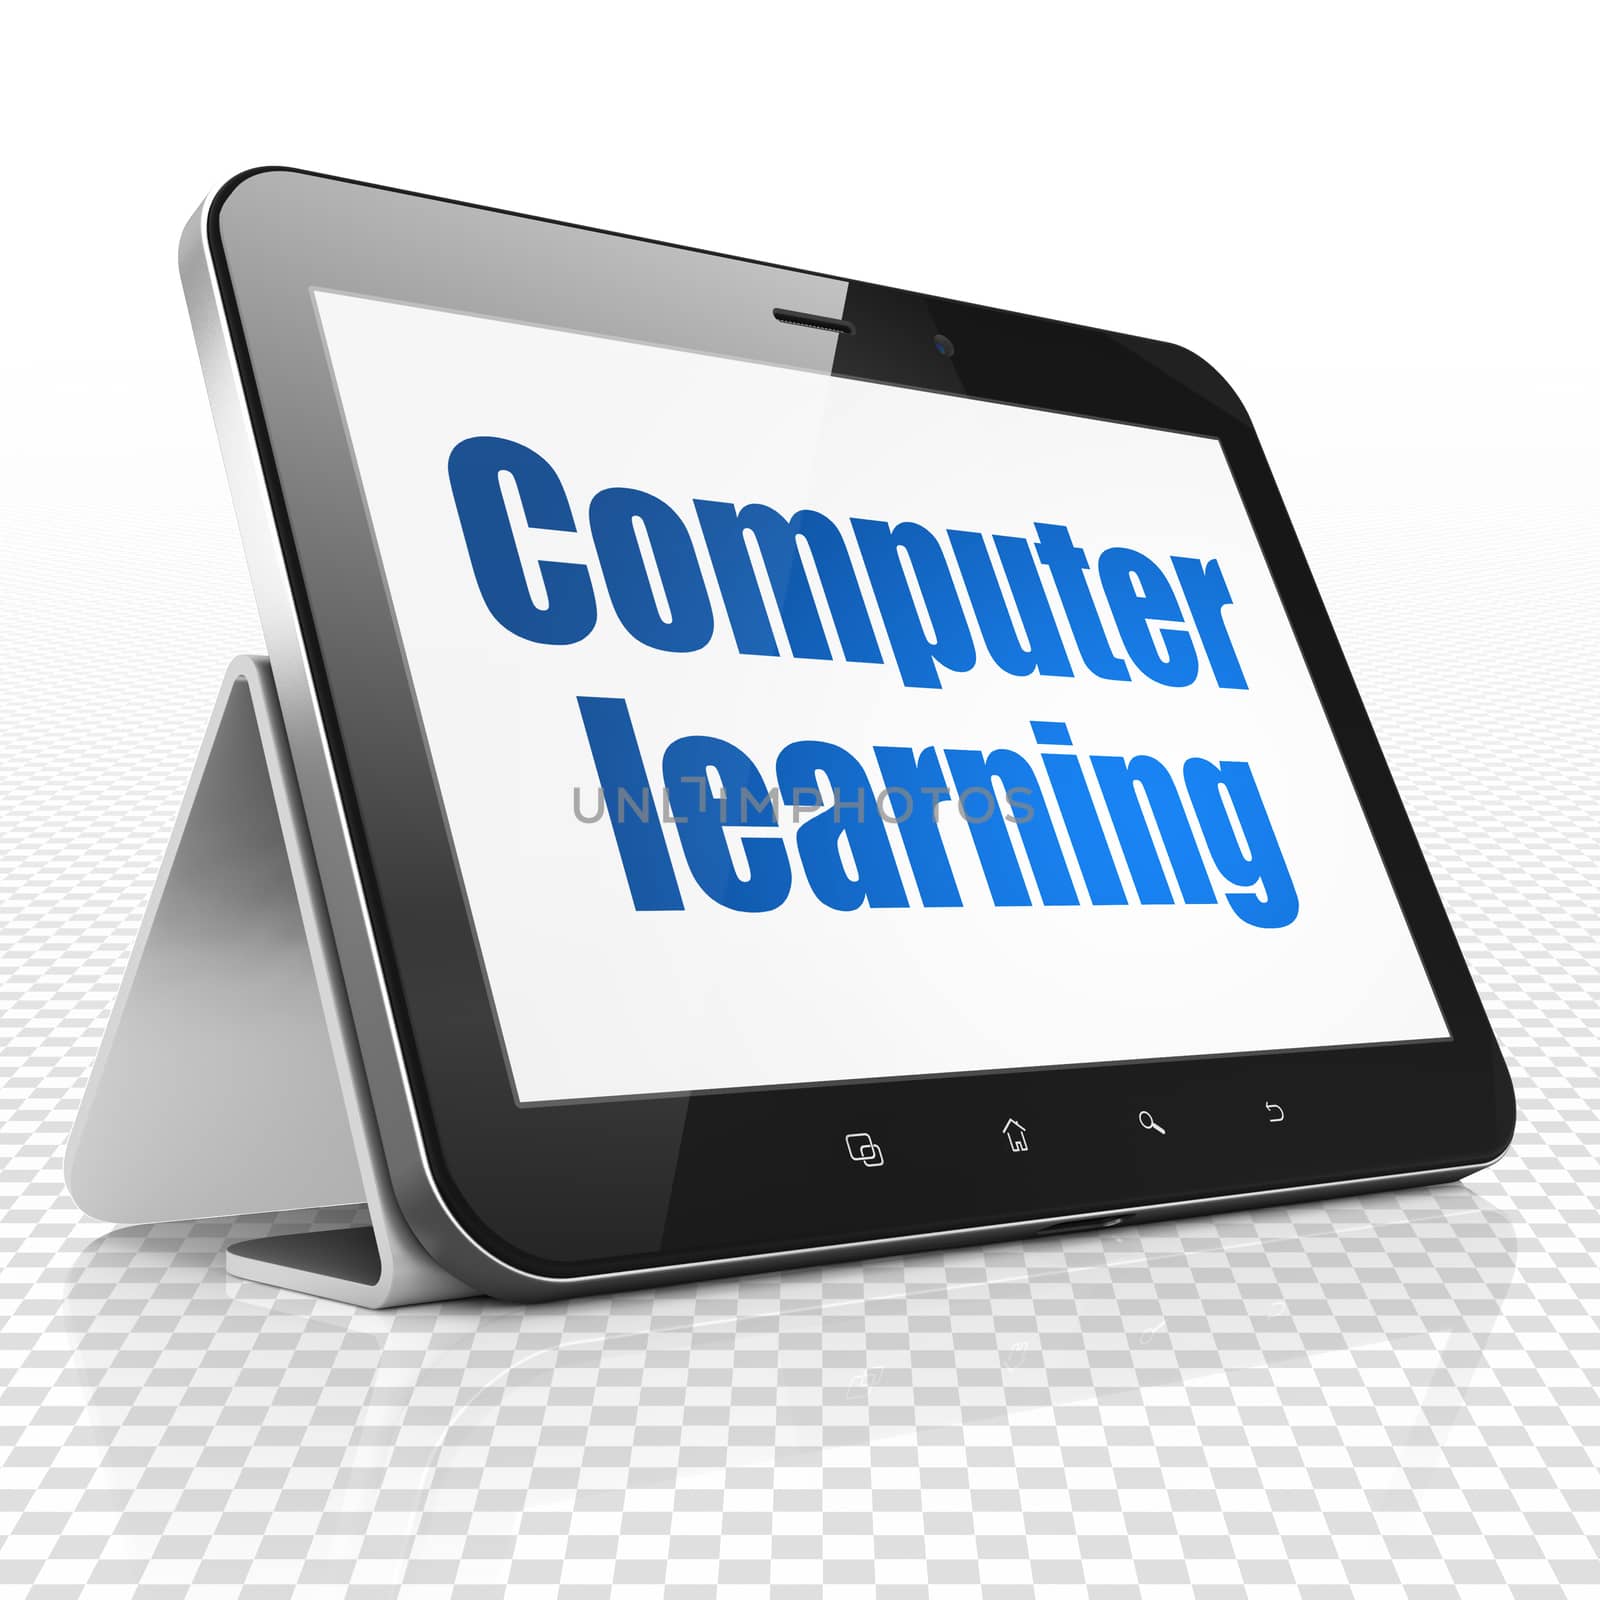 Learning concept: Tablet Computer with blue text Computer Learning on display